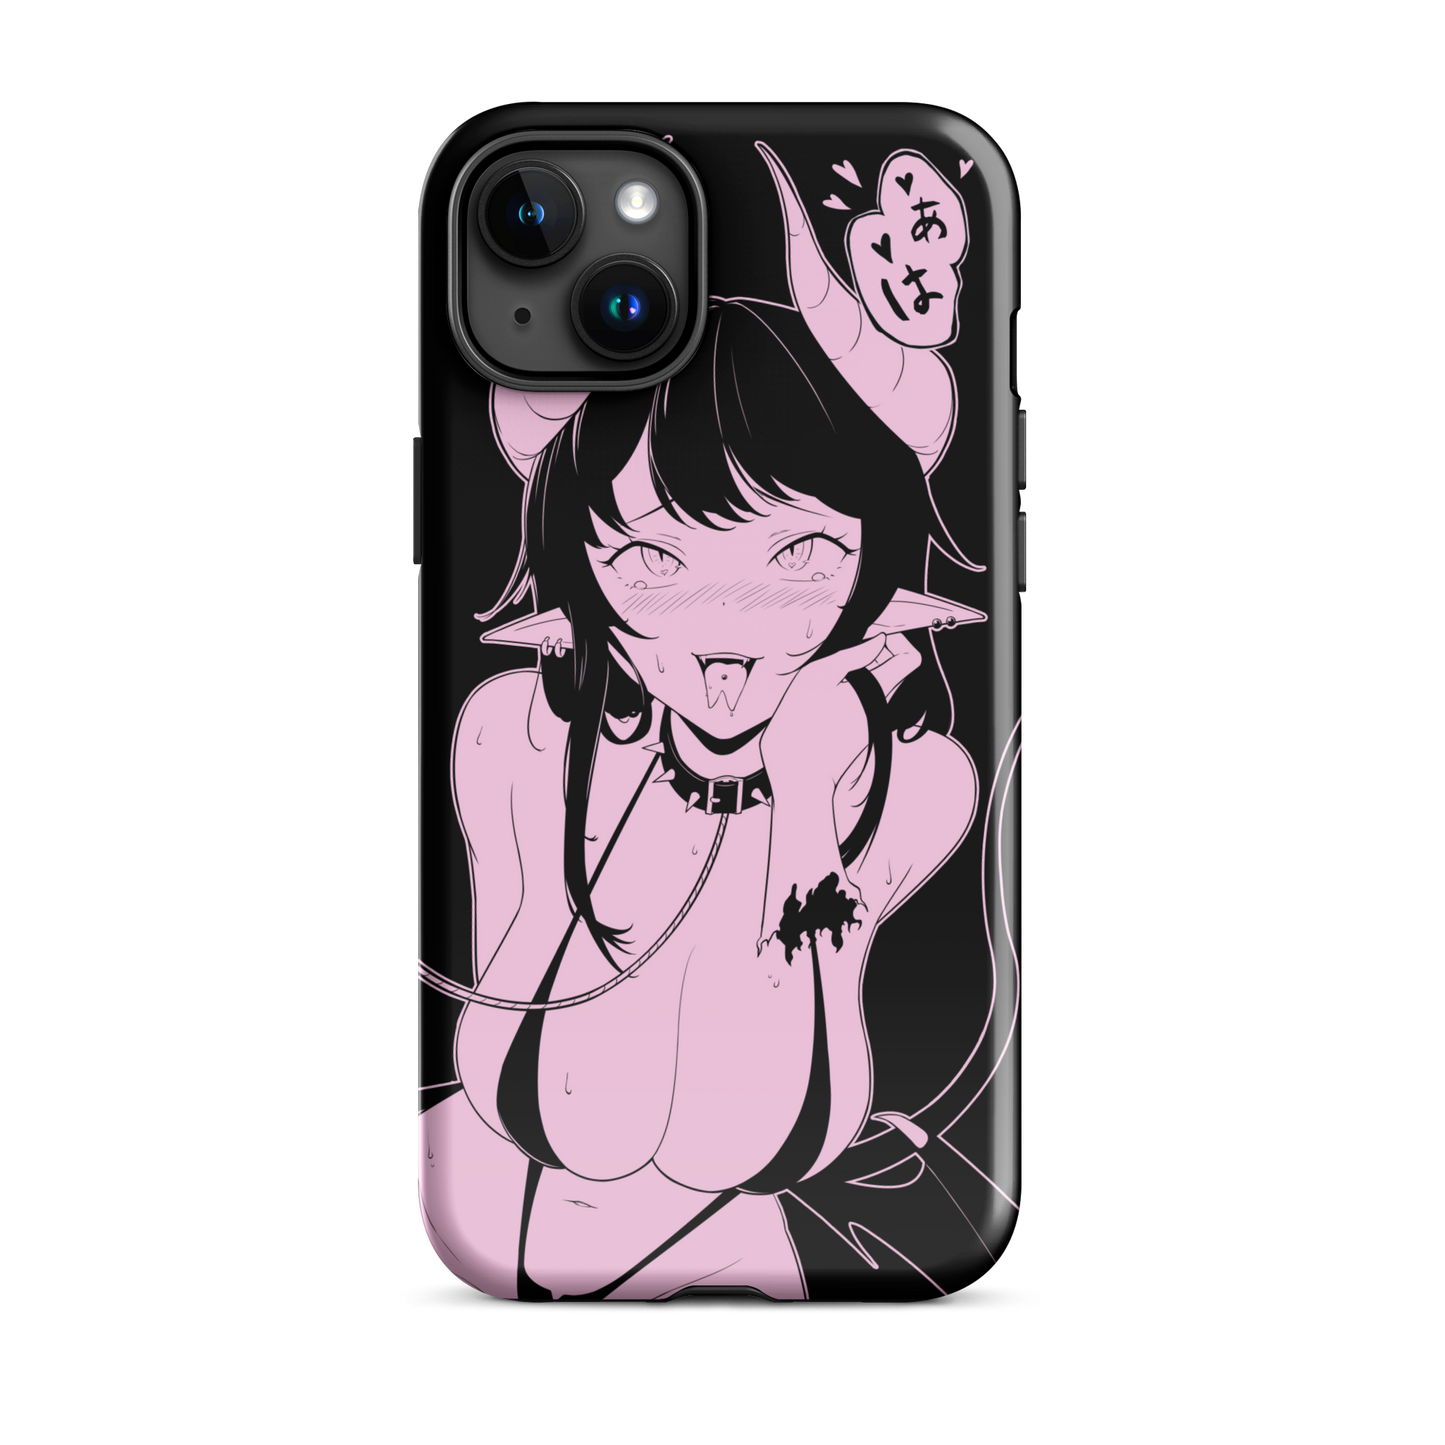 Obedience iPhone Case